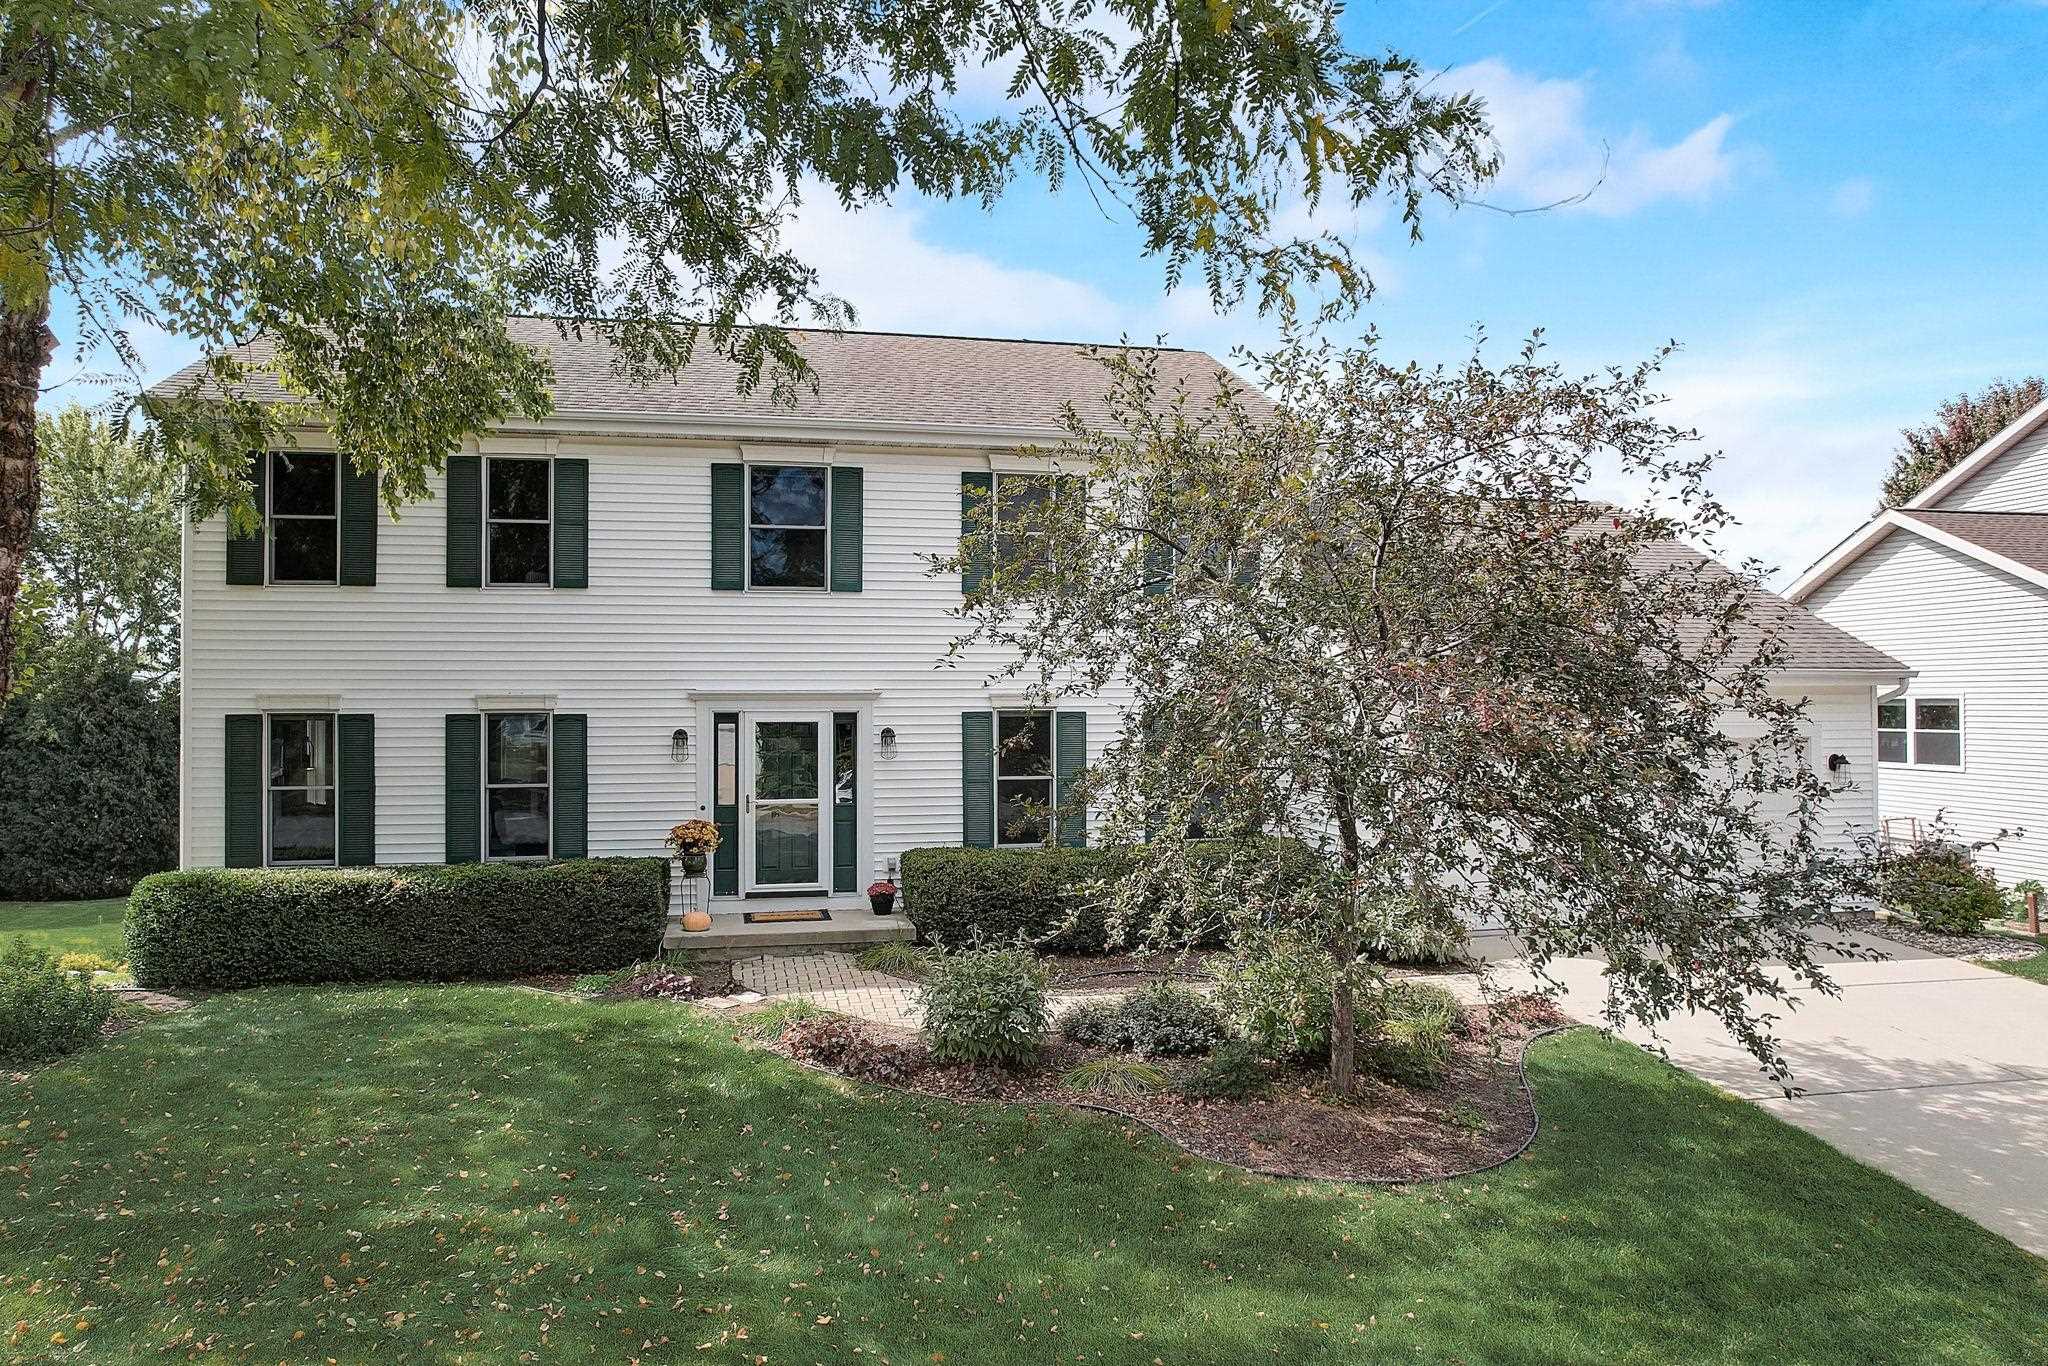 Showings begin 9/21 @ 8am. Meticulously maintained & beautifully updated Colonial in WESTRIDGE ESTATES & the coveted VERONA SCHOOL DISTRICT! 4 bedrms, 3.5 bths w/attractive upgrades throughout- remodeled kitchen w/soapstone counters/custom cabinetry/stainless appliances, stunning hardwood flrs on main level, updated white trim/doors, 2 gas fireplaces, glass french doors, main level laundry, extra deep garage, new furnace! 5 blocks or less to Epic, new HS & 3 parks! Enormous deck overlooking gorgeous, private backyrd w/mature landscaping & dreamy sunsets. Backyrd firepit for cozy WI fall evening fun. You’ll be captivated by this one! Perhaps Taylor would say it best: Best believe this home is Bejeweled, when you walk in the room, you’ll see how the whole place shimmers...